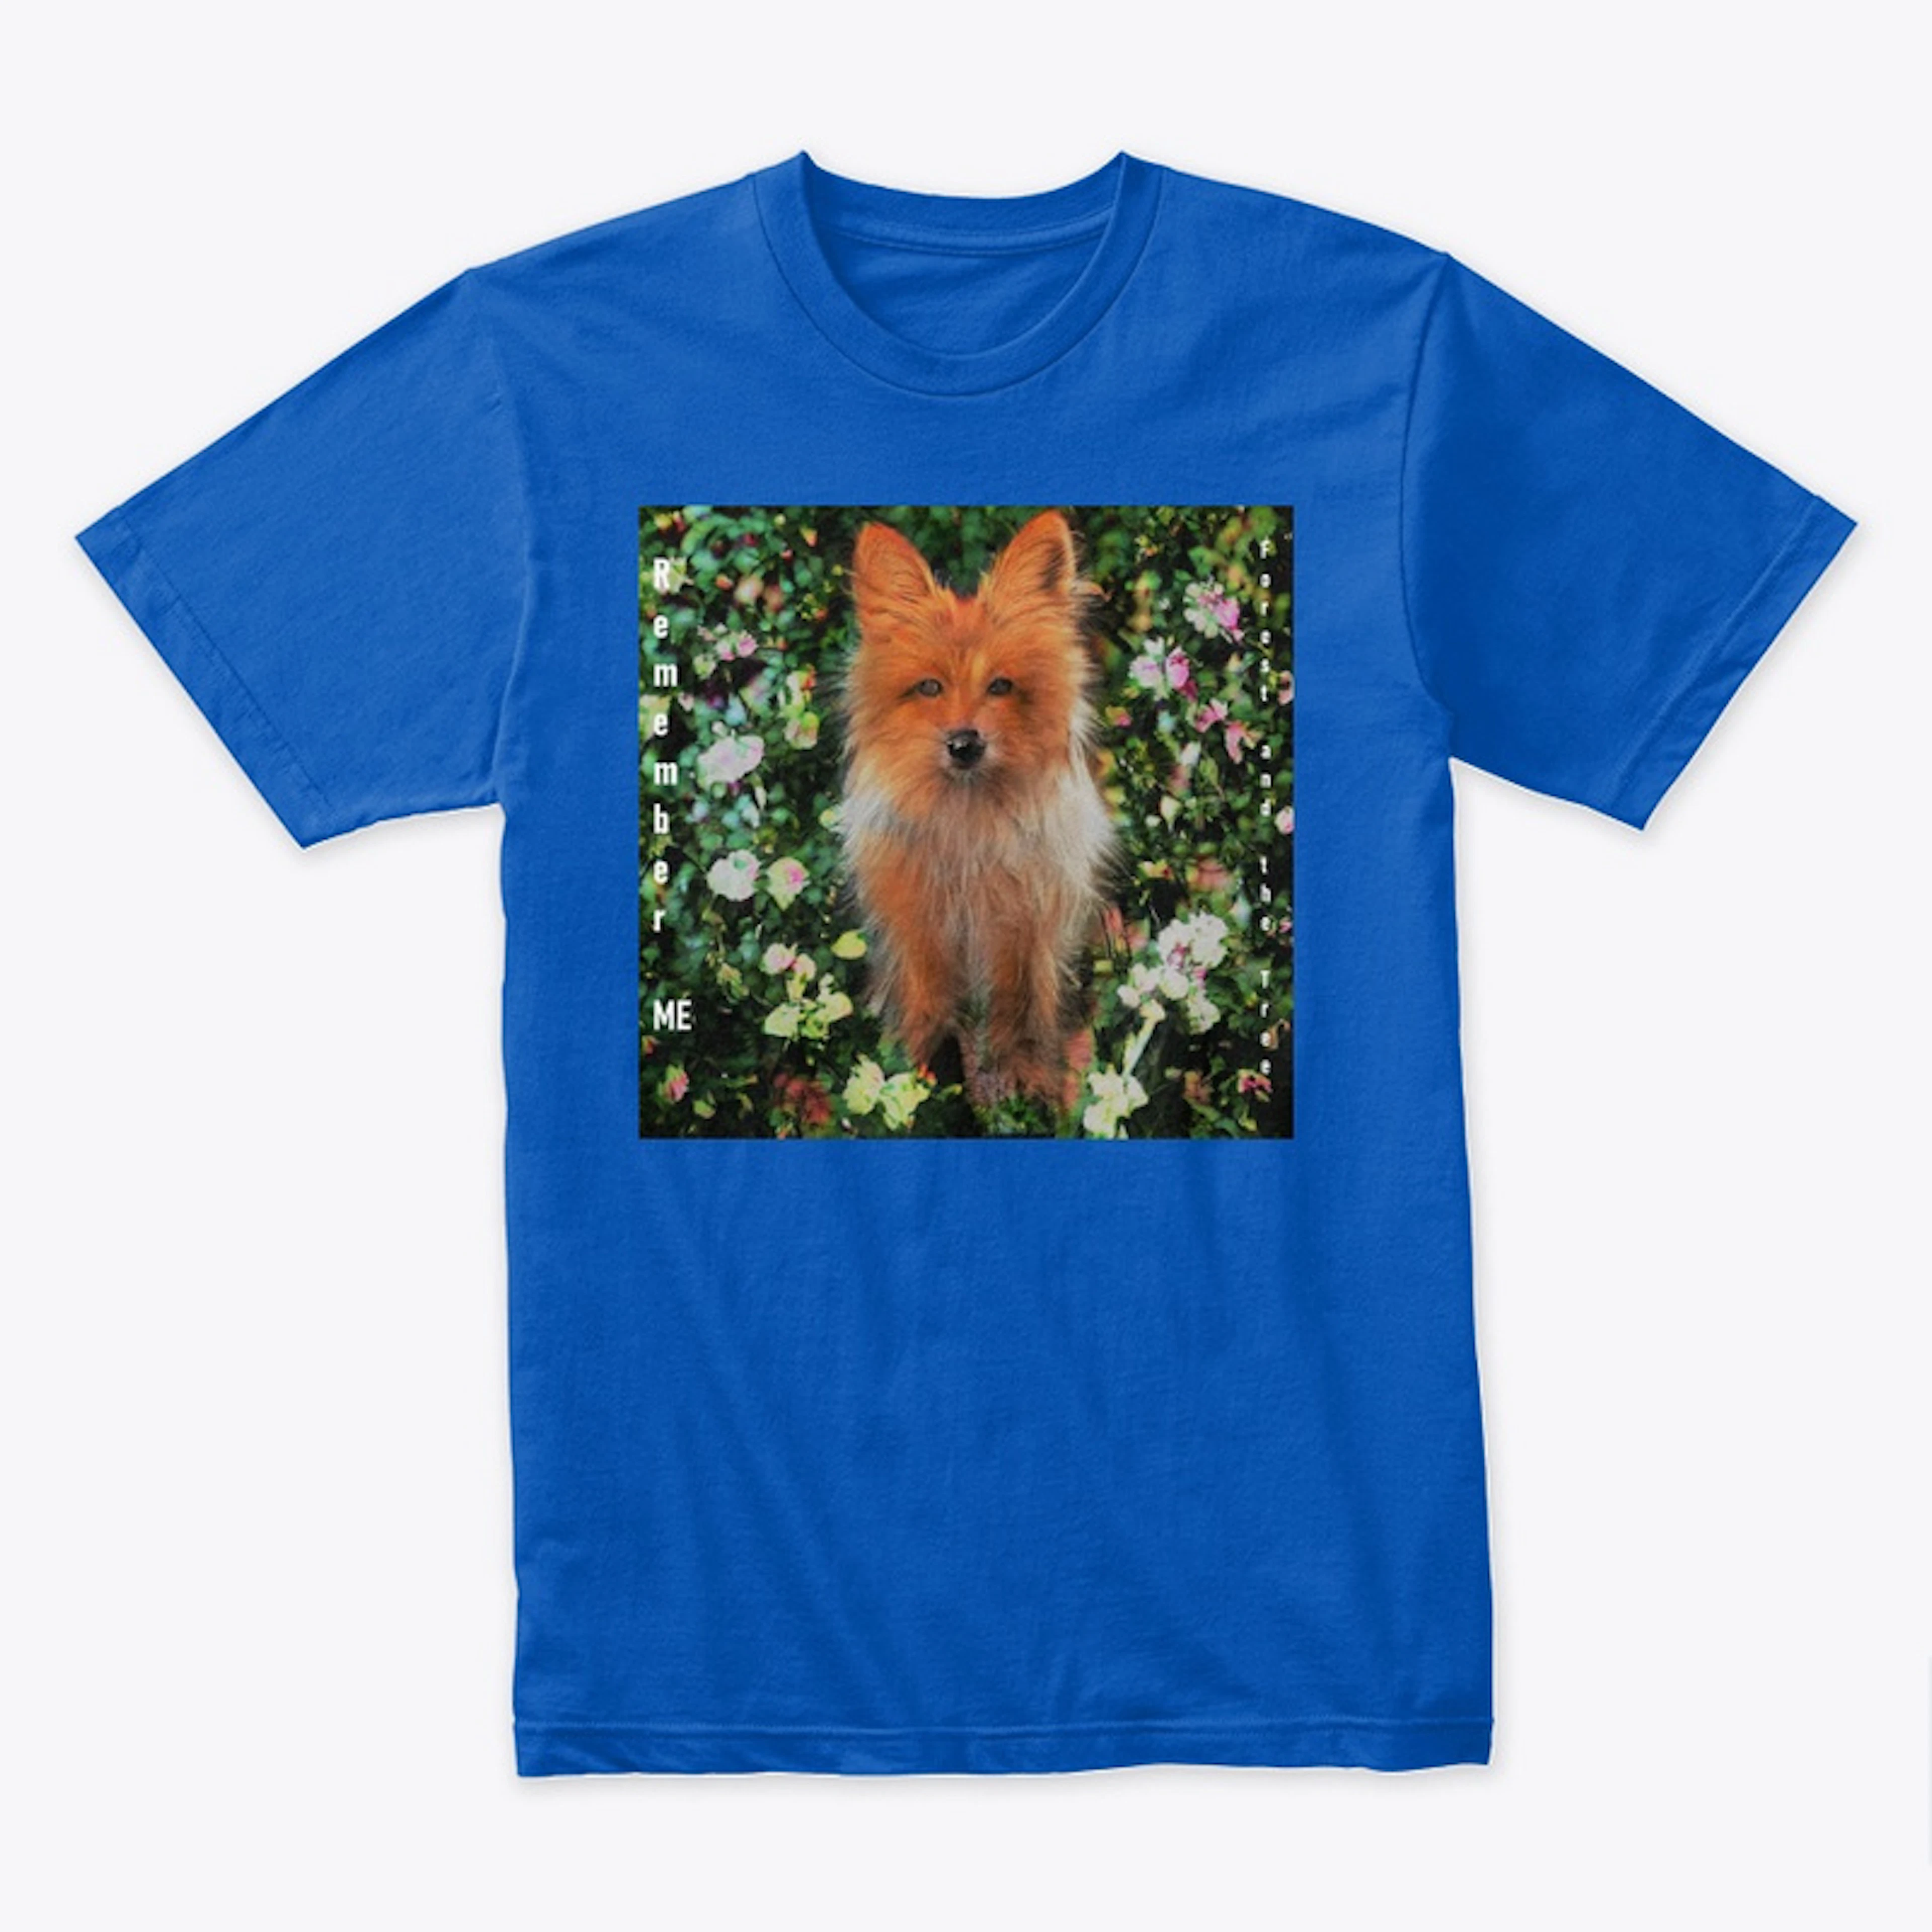 Forest and the Tree - Merch